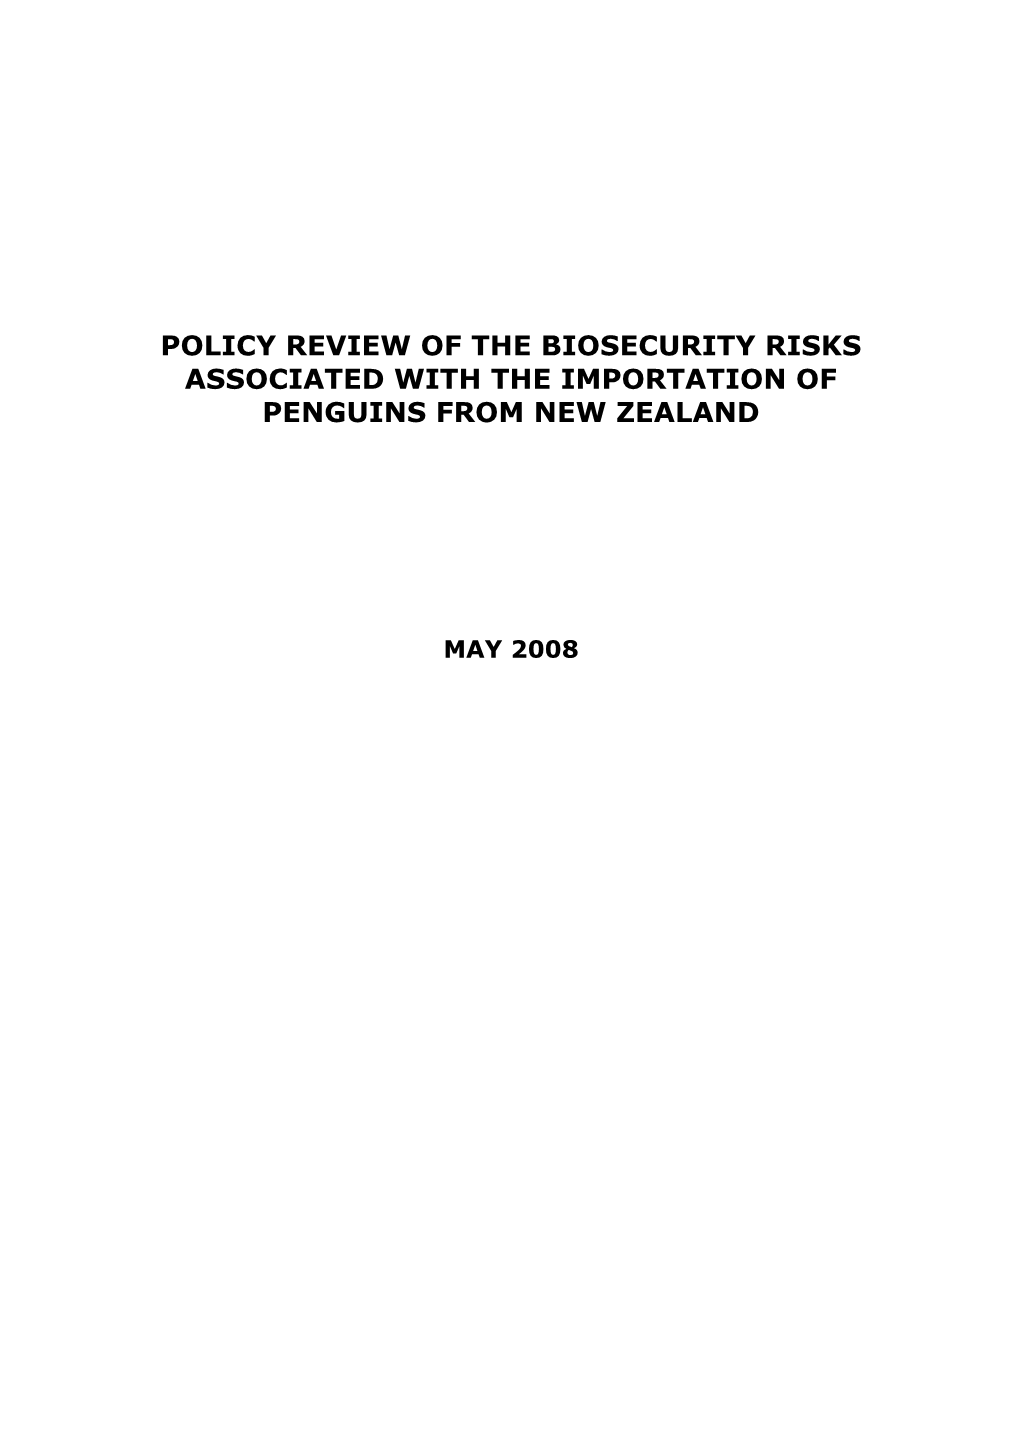 Policy Review of the Biosecurity Risks Associated with the Importation of Penguins From